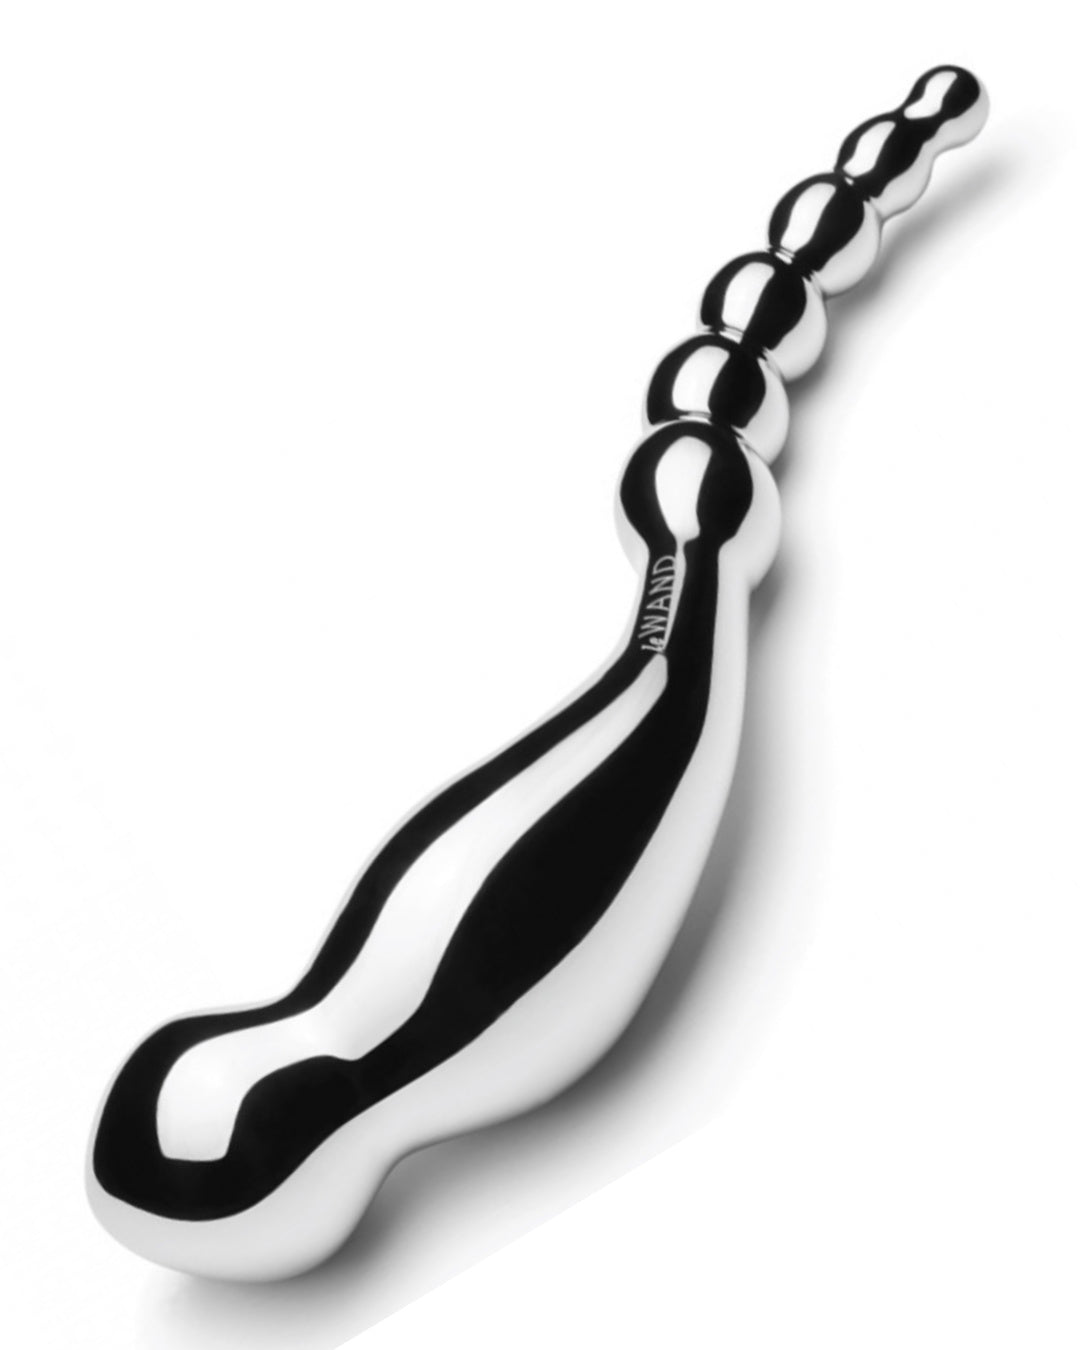 Le Wand Swerve Double Ended Stainless Steel Dildo horizontal on a white background with the larger tip towards the camera